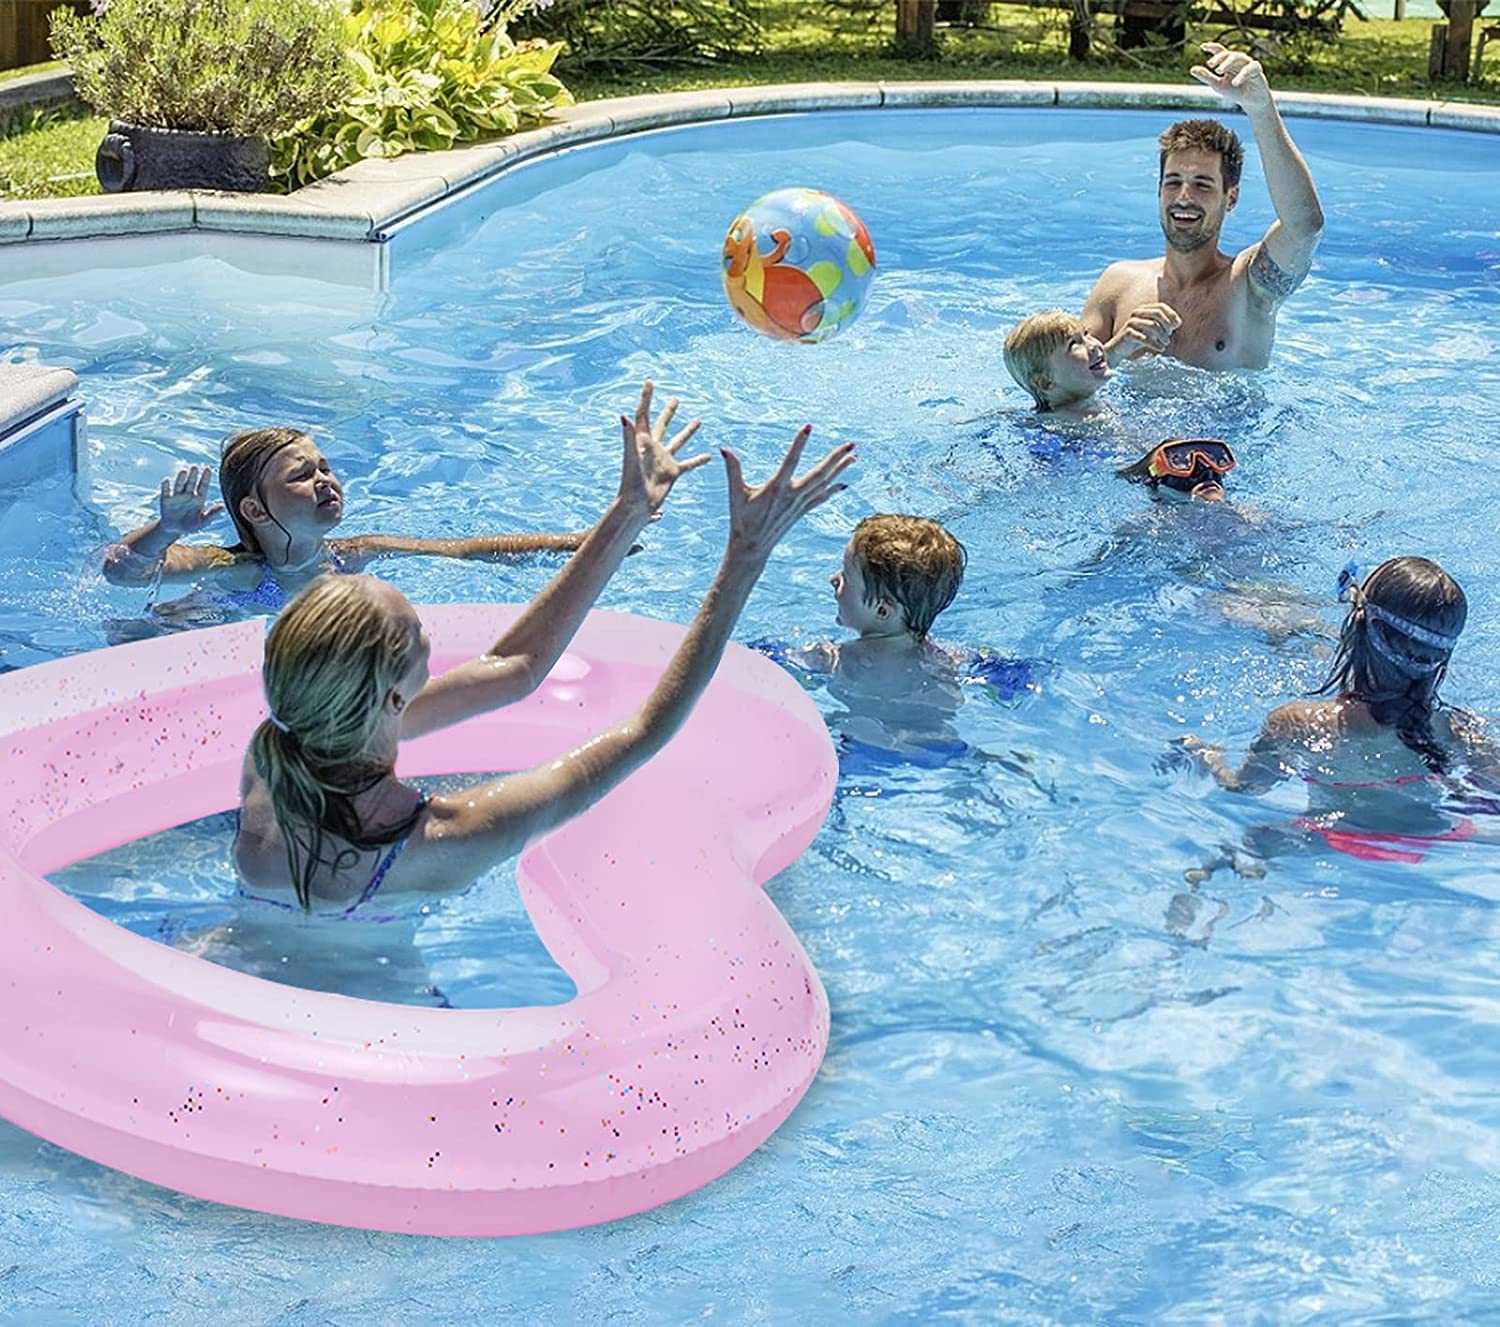 Life Vest Buoy table Swim Rings Heart Shaped Swimming Pool Float Loungers Tube Ring Floatie Water Fun Beach Party Toys for Kids Adults HKD230703